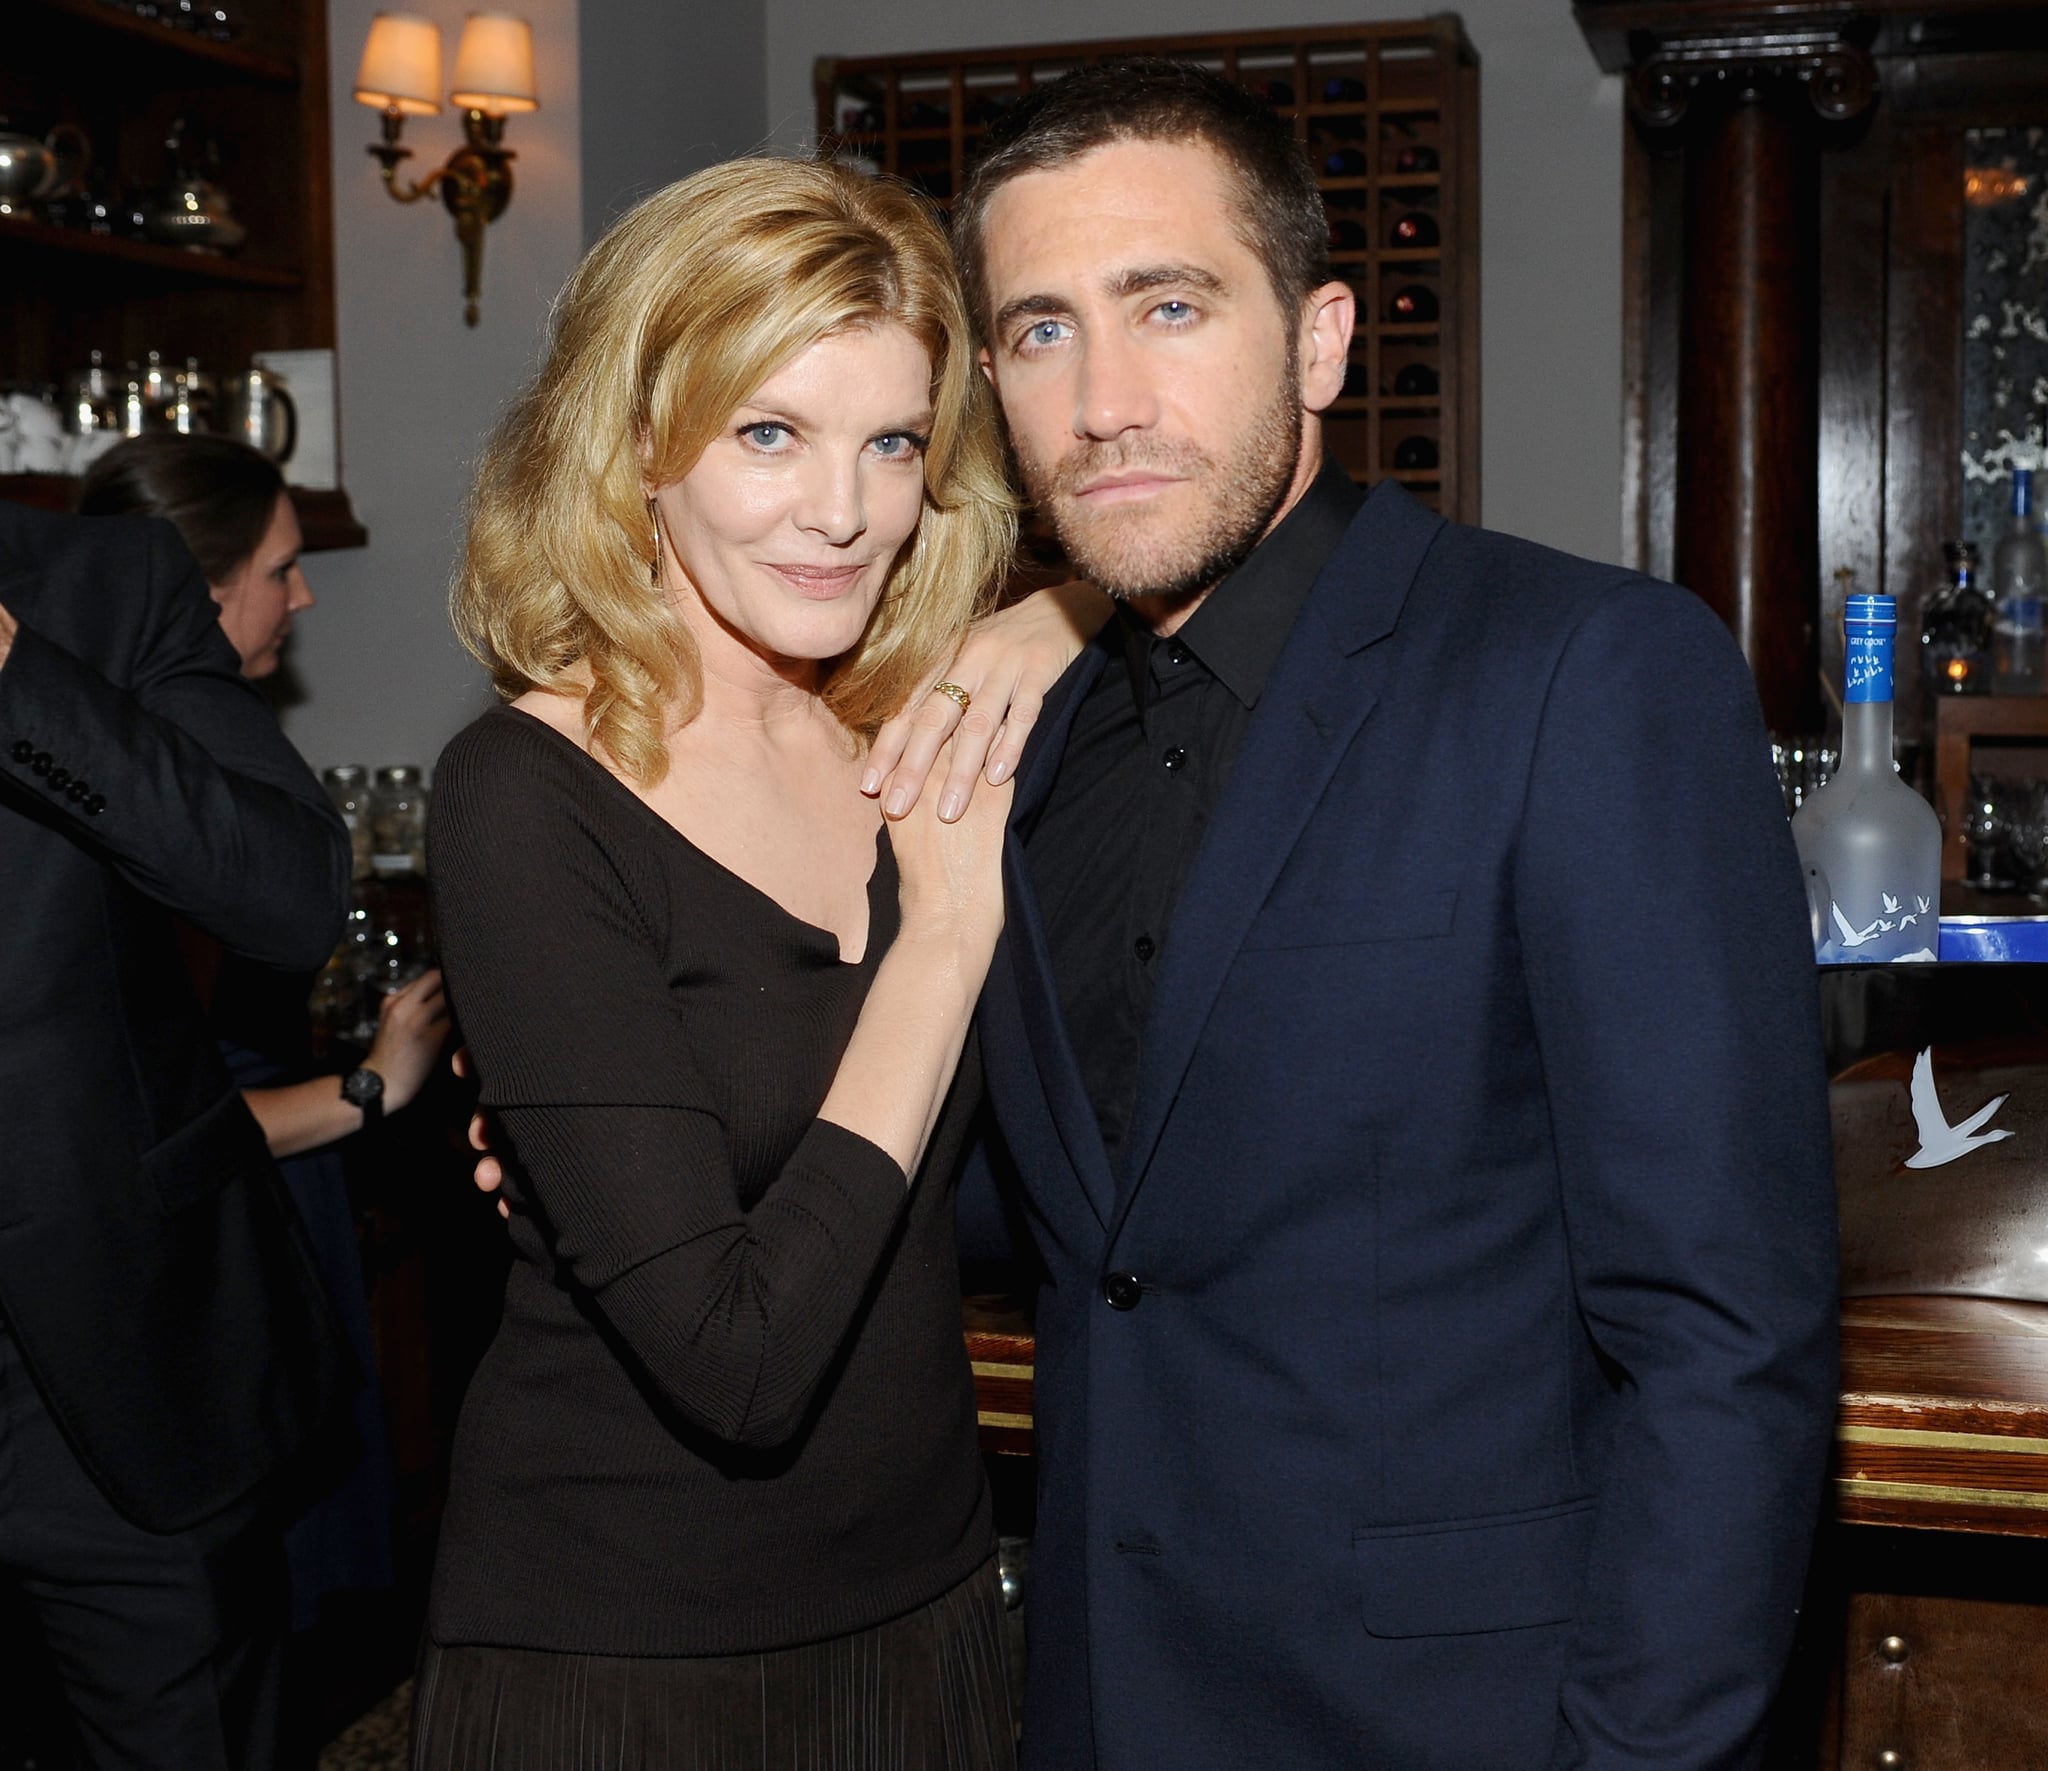 Jake Gyllenhaal some face time with Rene Russo at their | Kate Winslet Dazzles at the Toronto International Festival | POPSUGAR Celebrity Photo 27